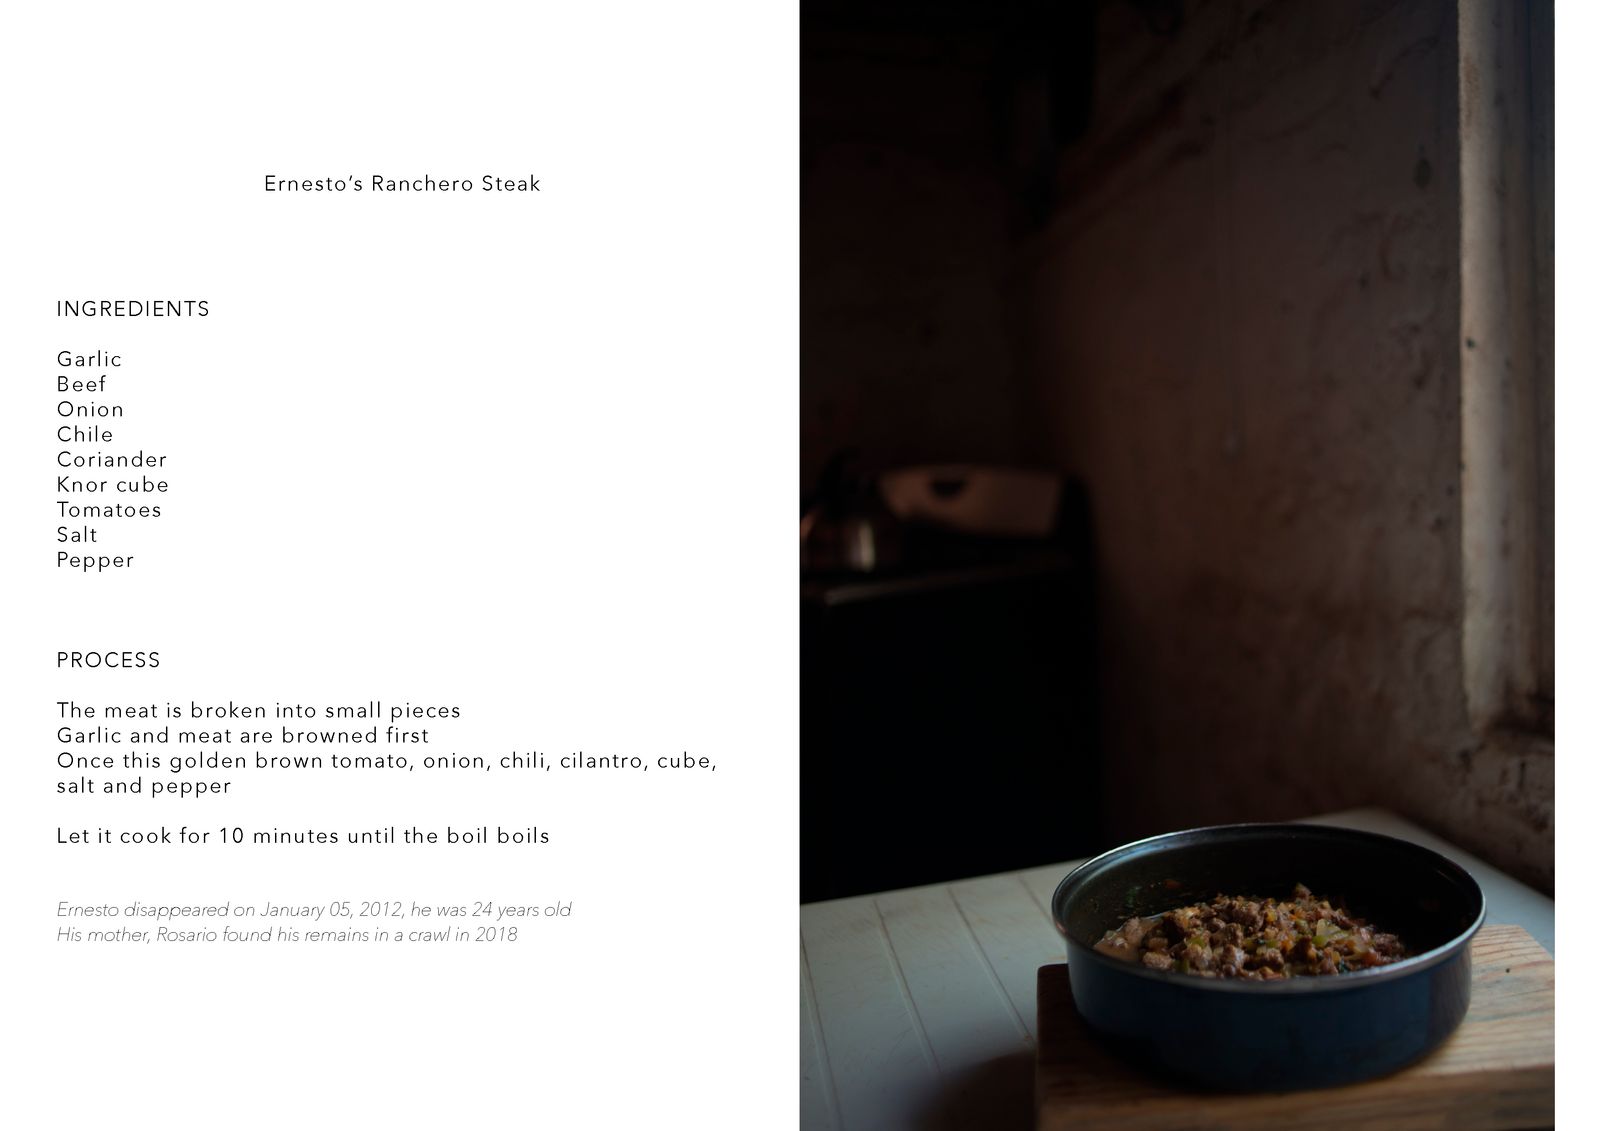 © Zahara Gomez Lucini - Image from the Recipes for memory photography project